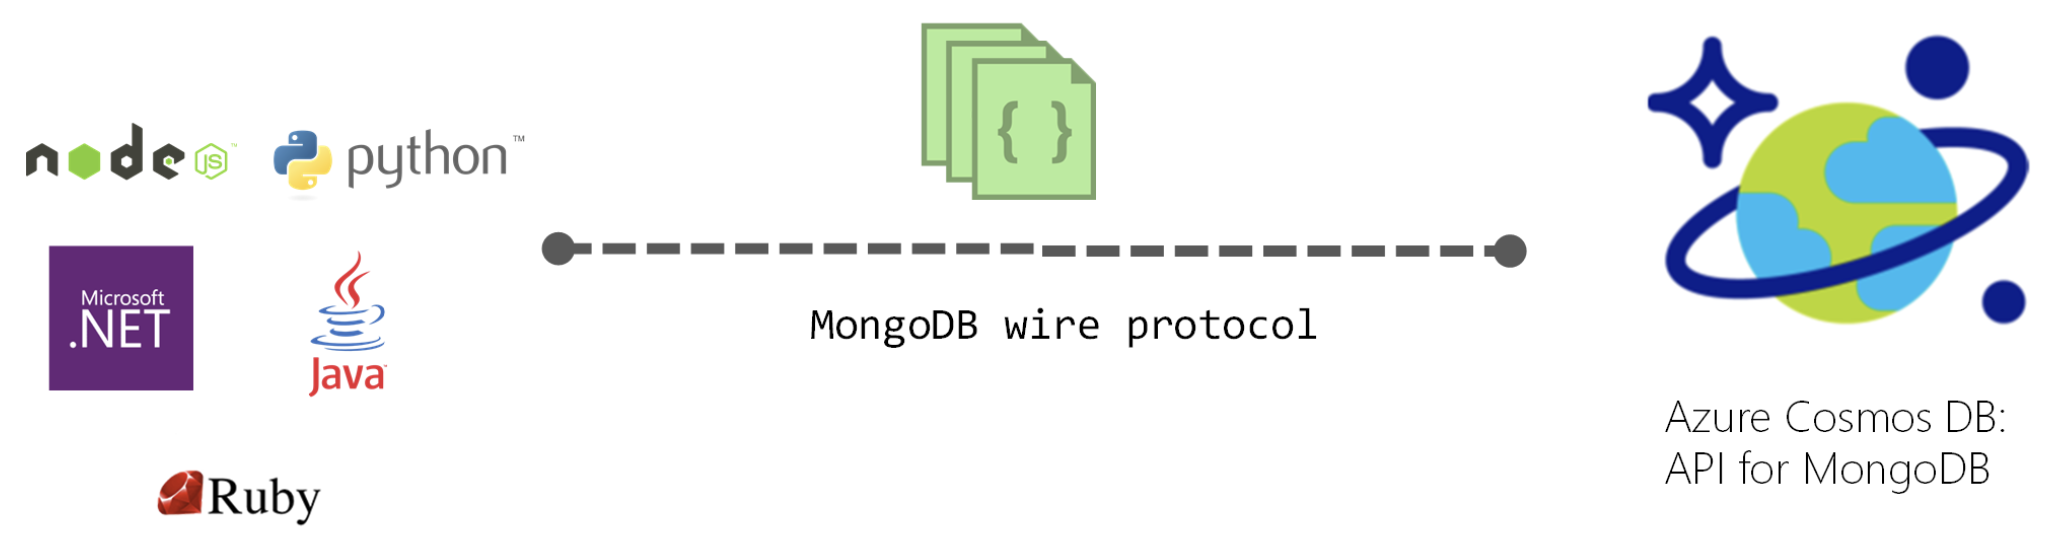 Diagram showing that Cosmos DB supports .NET and MongoDB wire protocol.